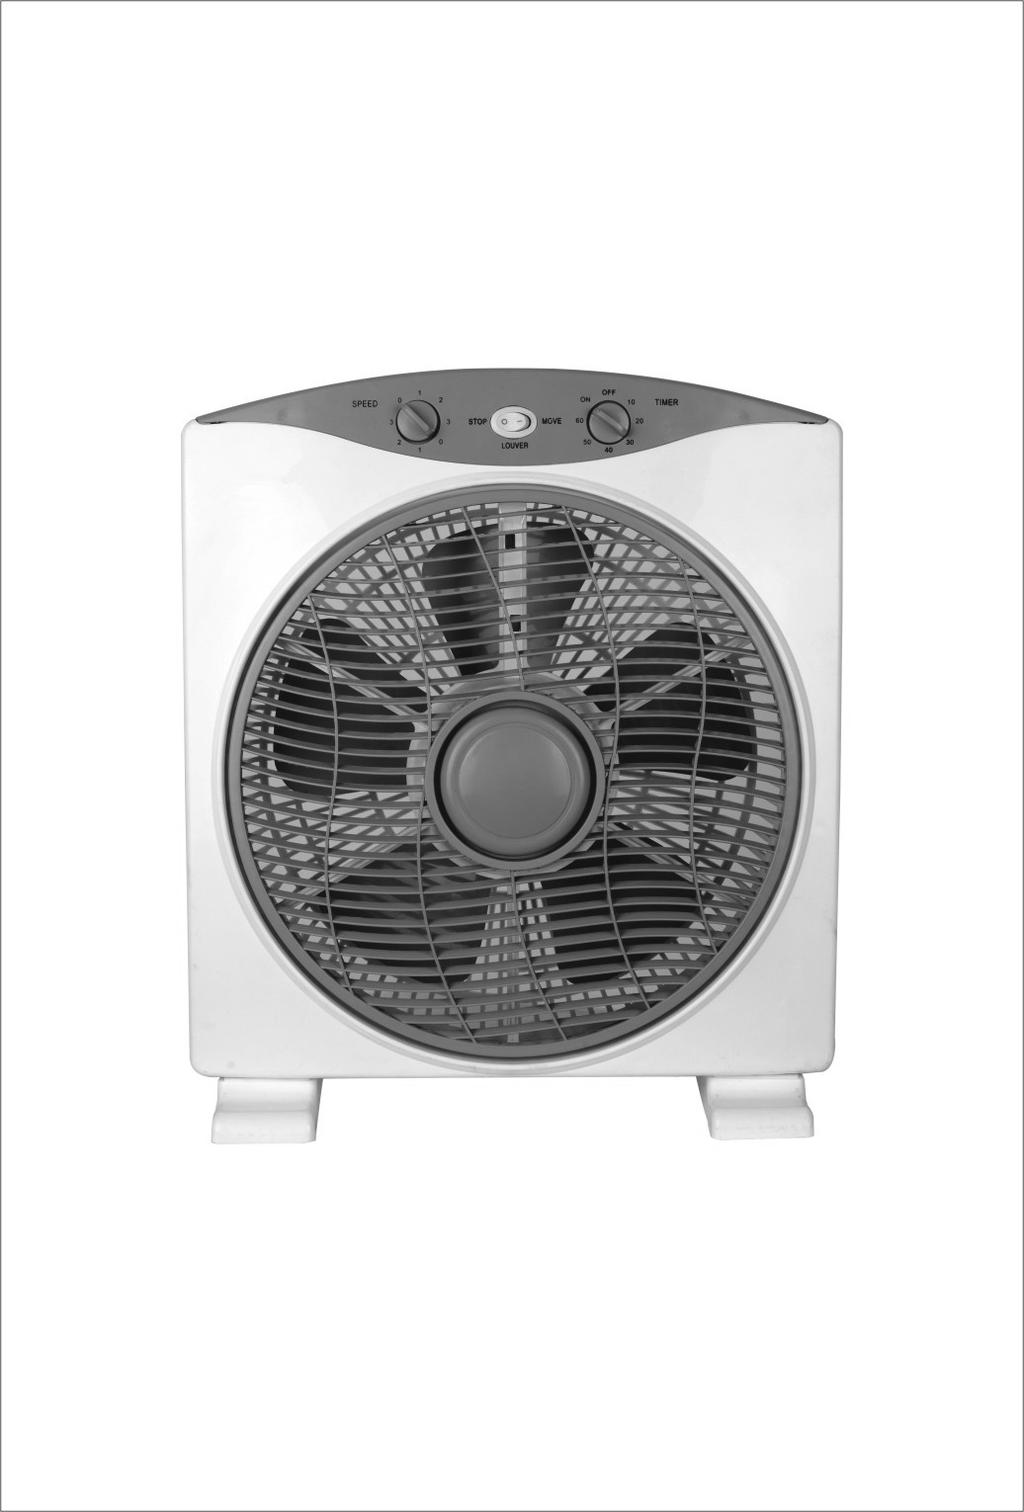 INSTRUCTION MANUAL 12 BOX FAN AB-5466BX DEAR CUSTOMER In order to achieve the best performance of your product, please read this